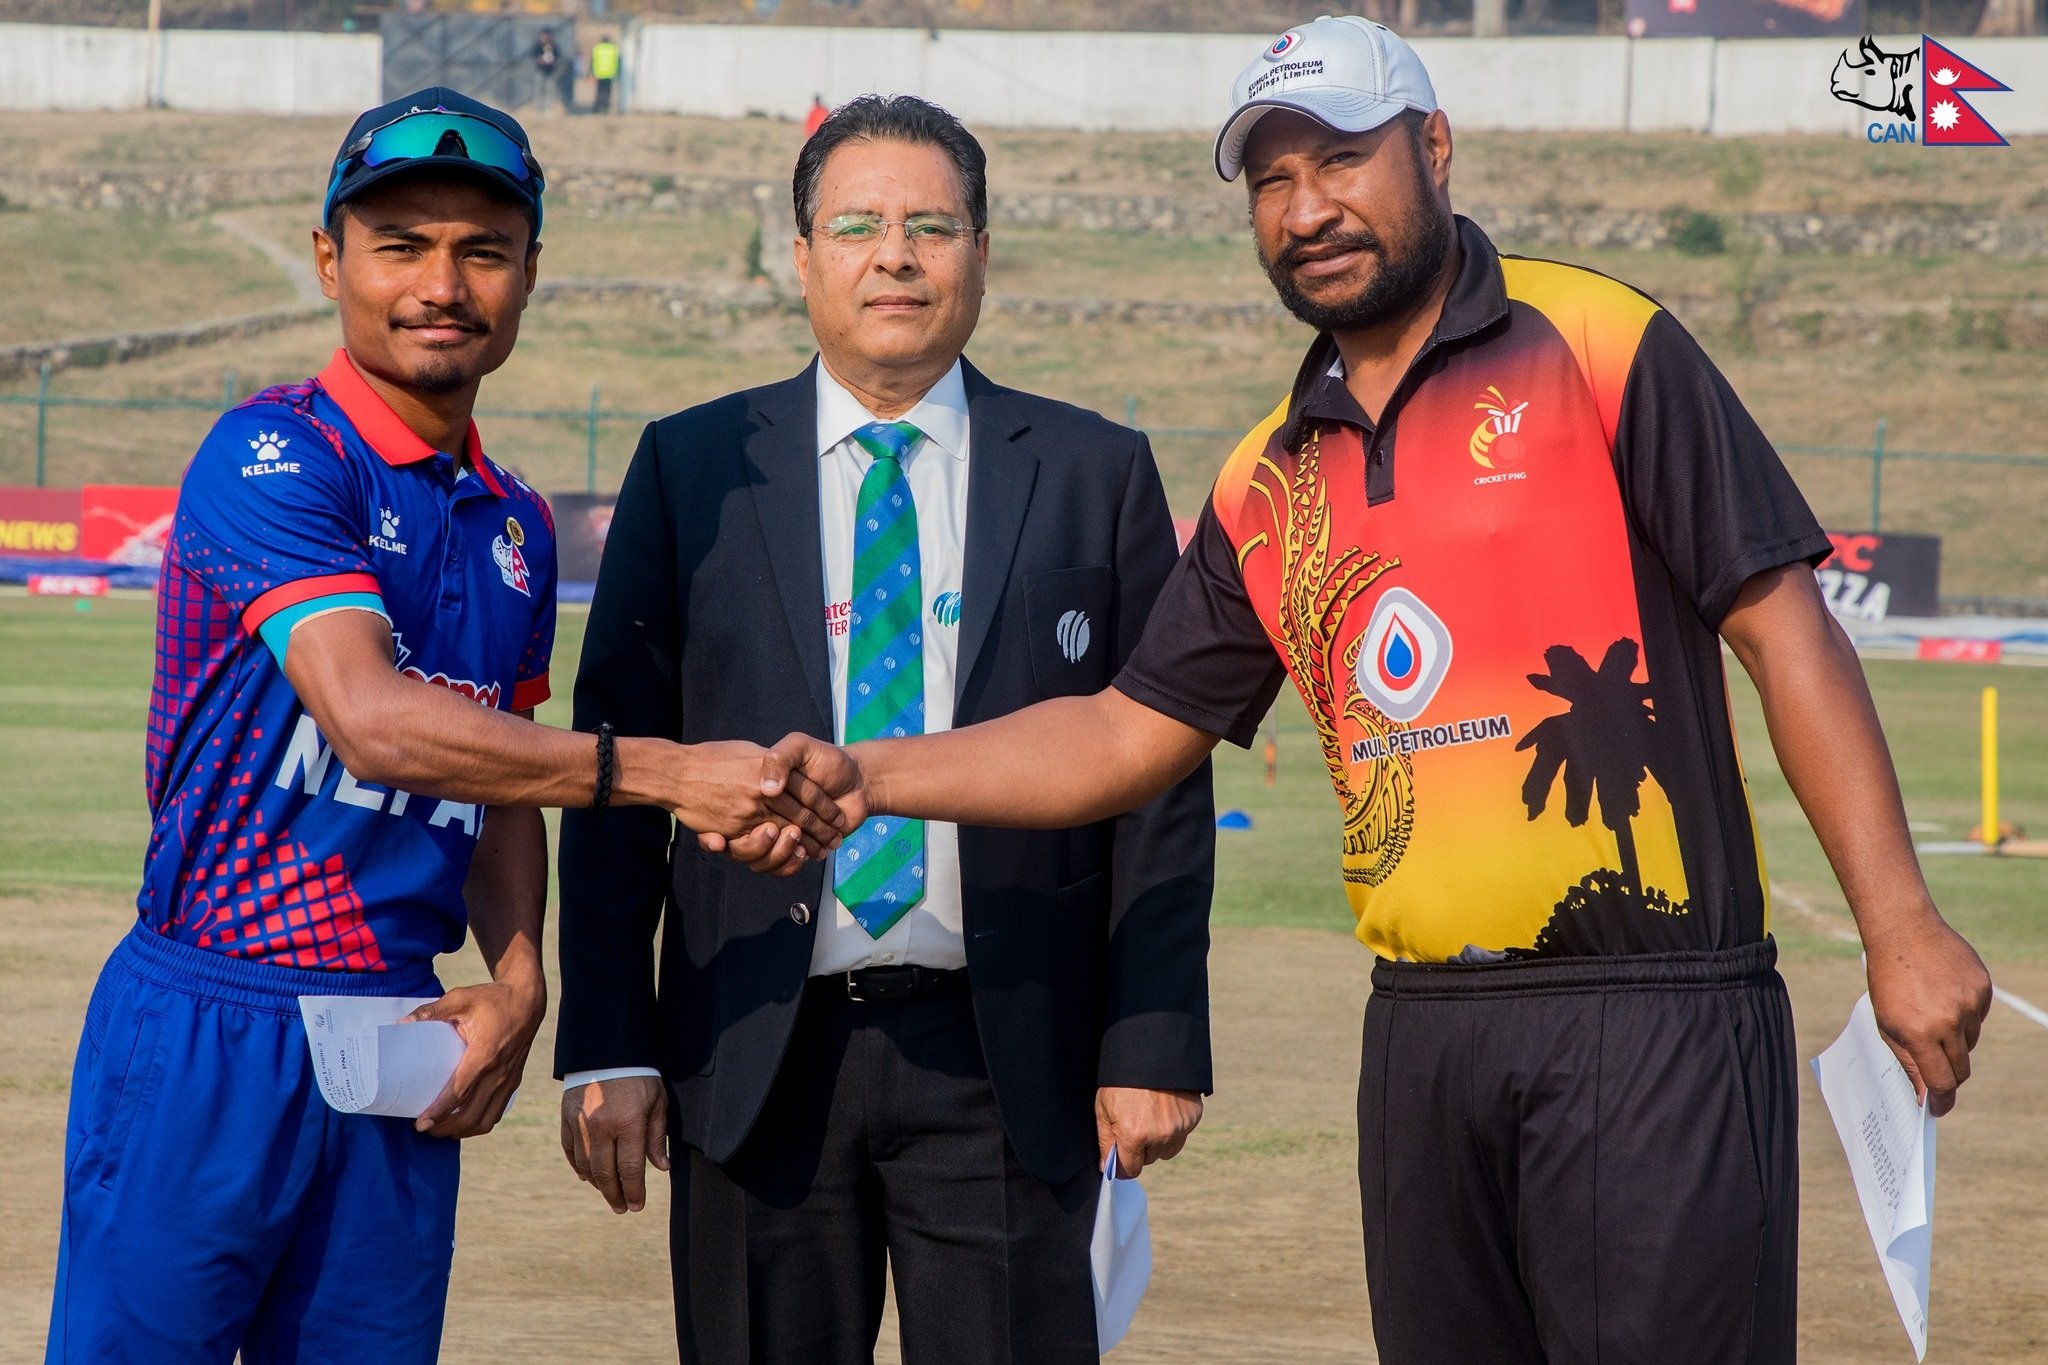 Nepal wins toss, chooses to bowl first against Papua New Guinea